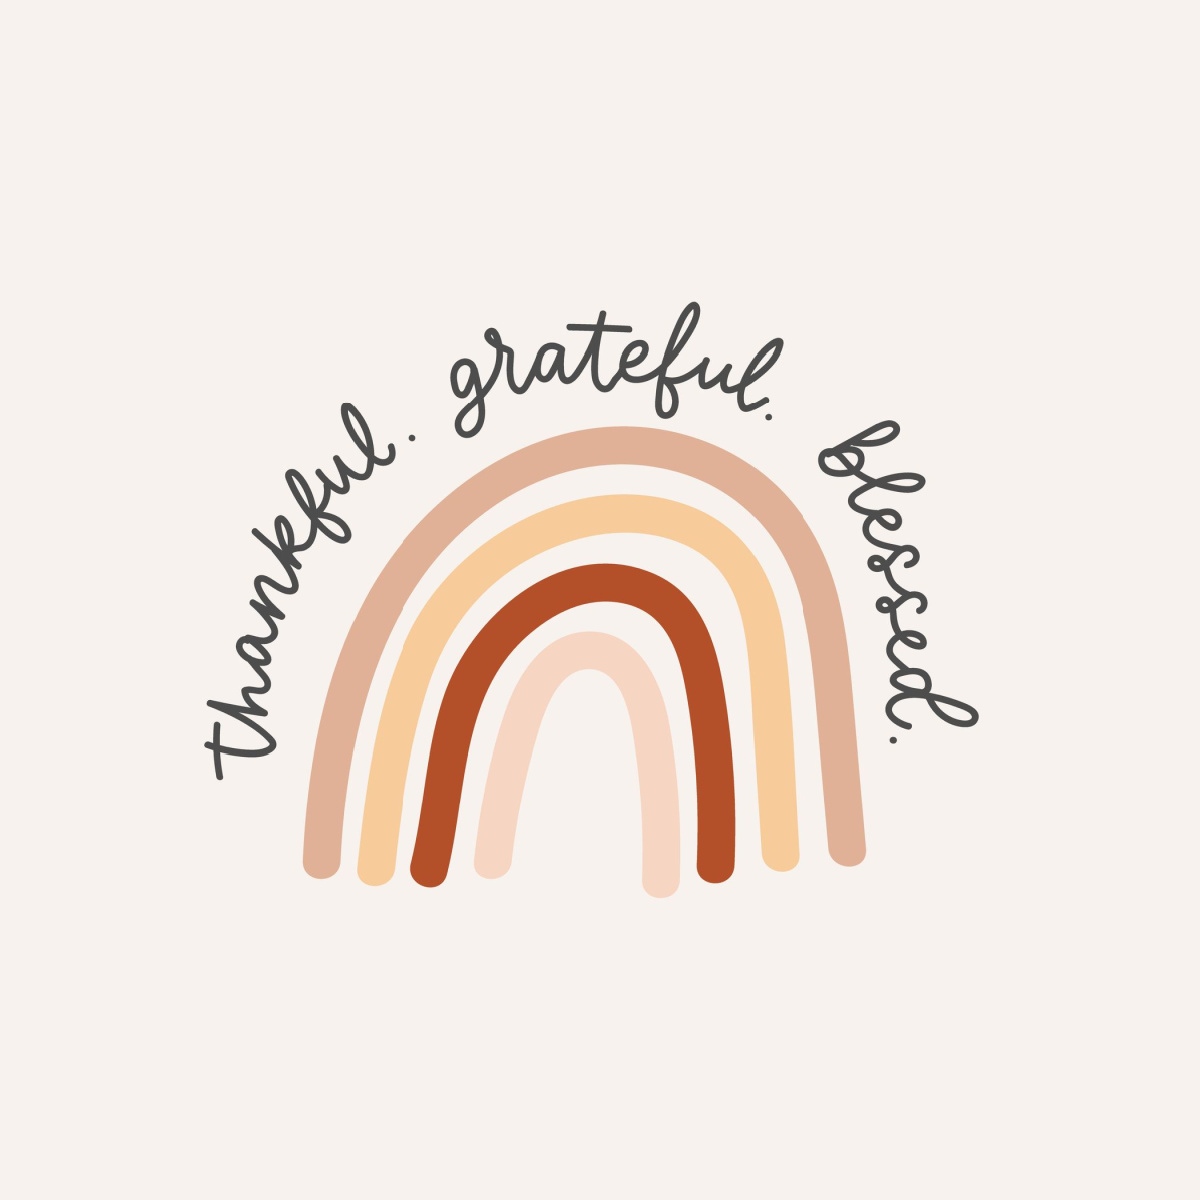 A rainbow of pink, orange and red with the words "thankful, grateful, blessed" in an arch over it in cursive writing.